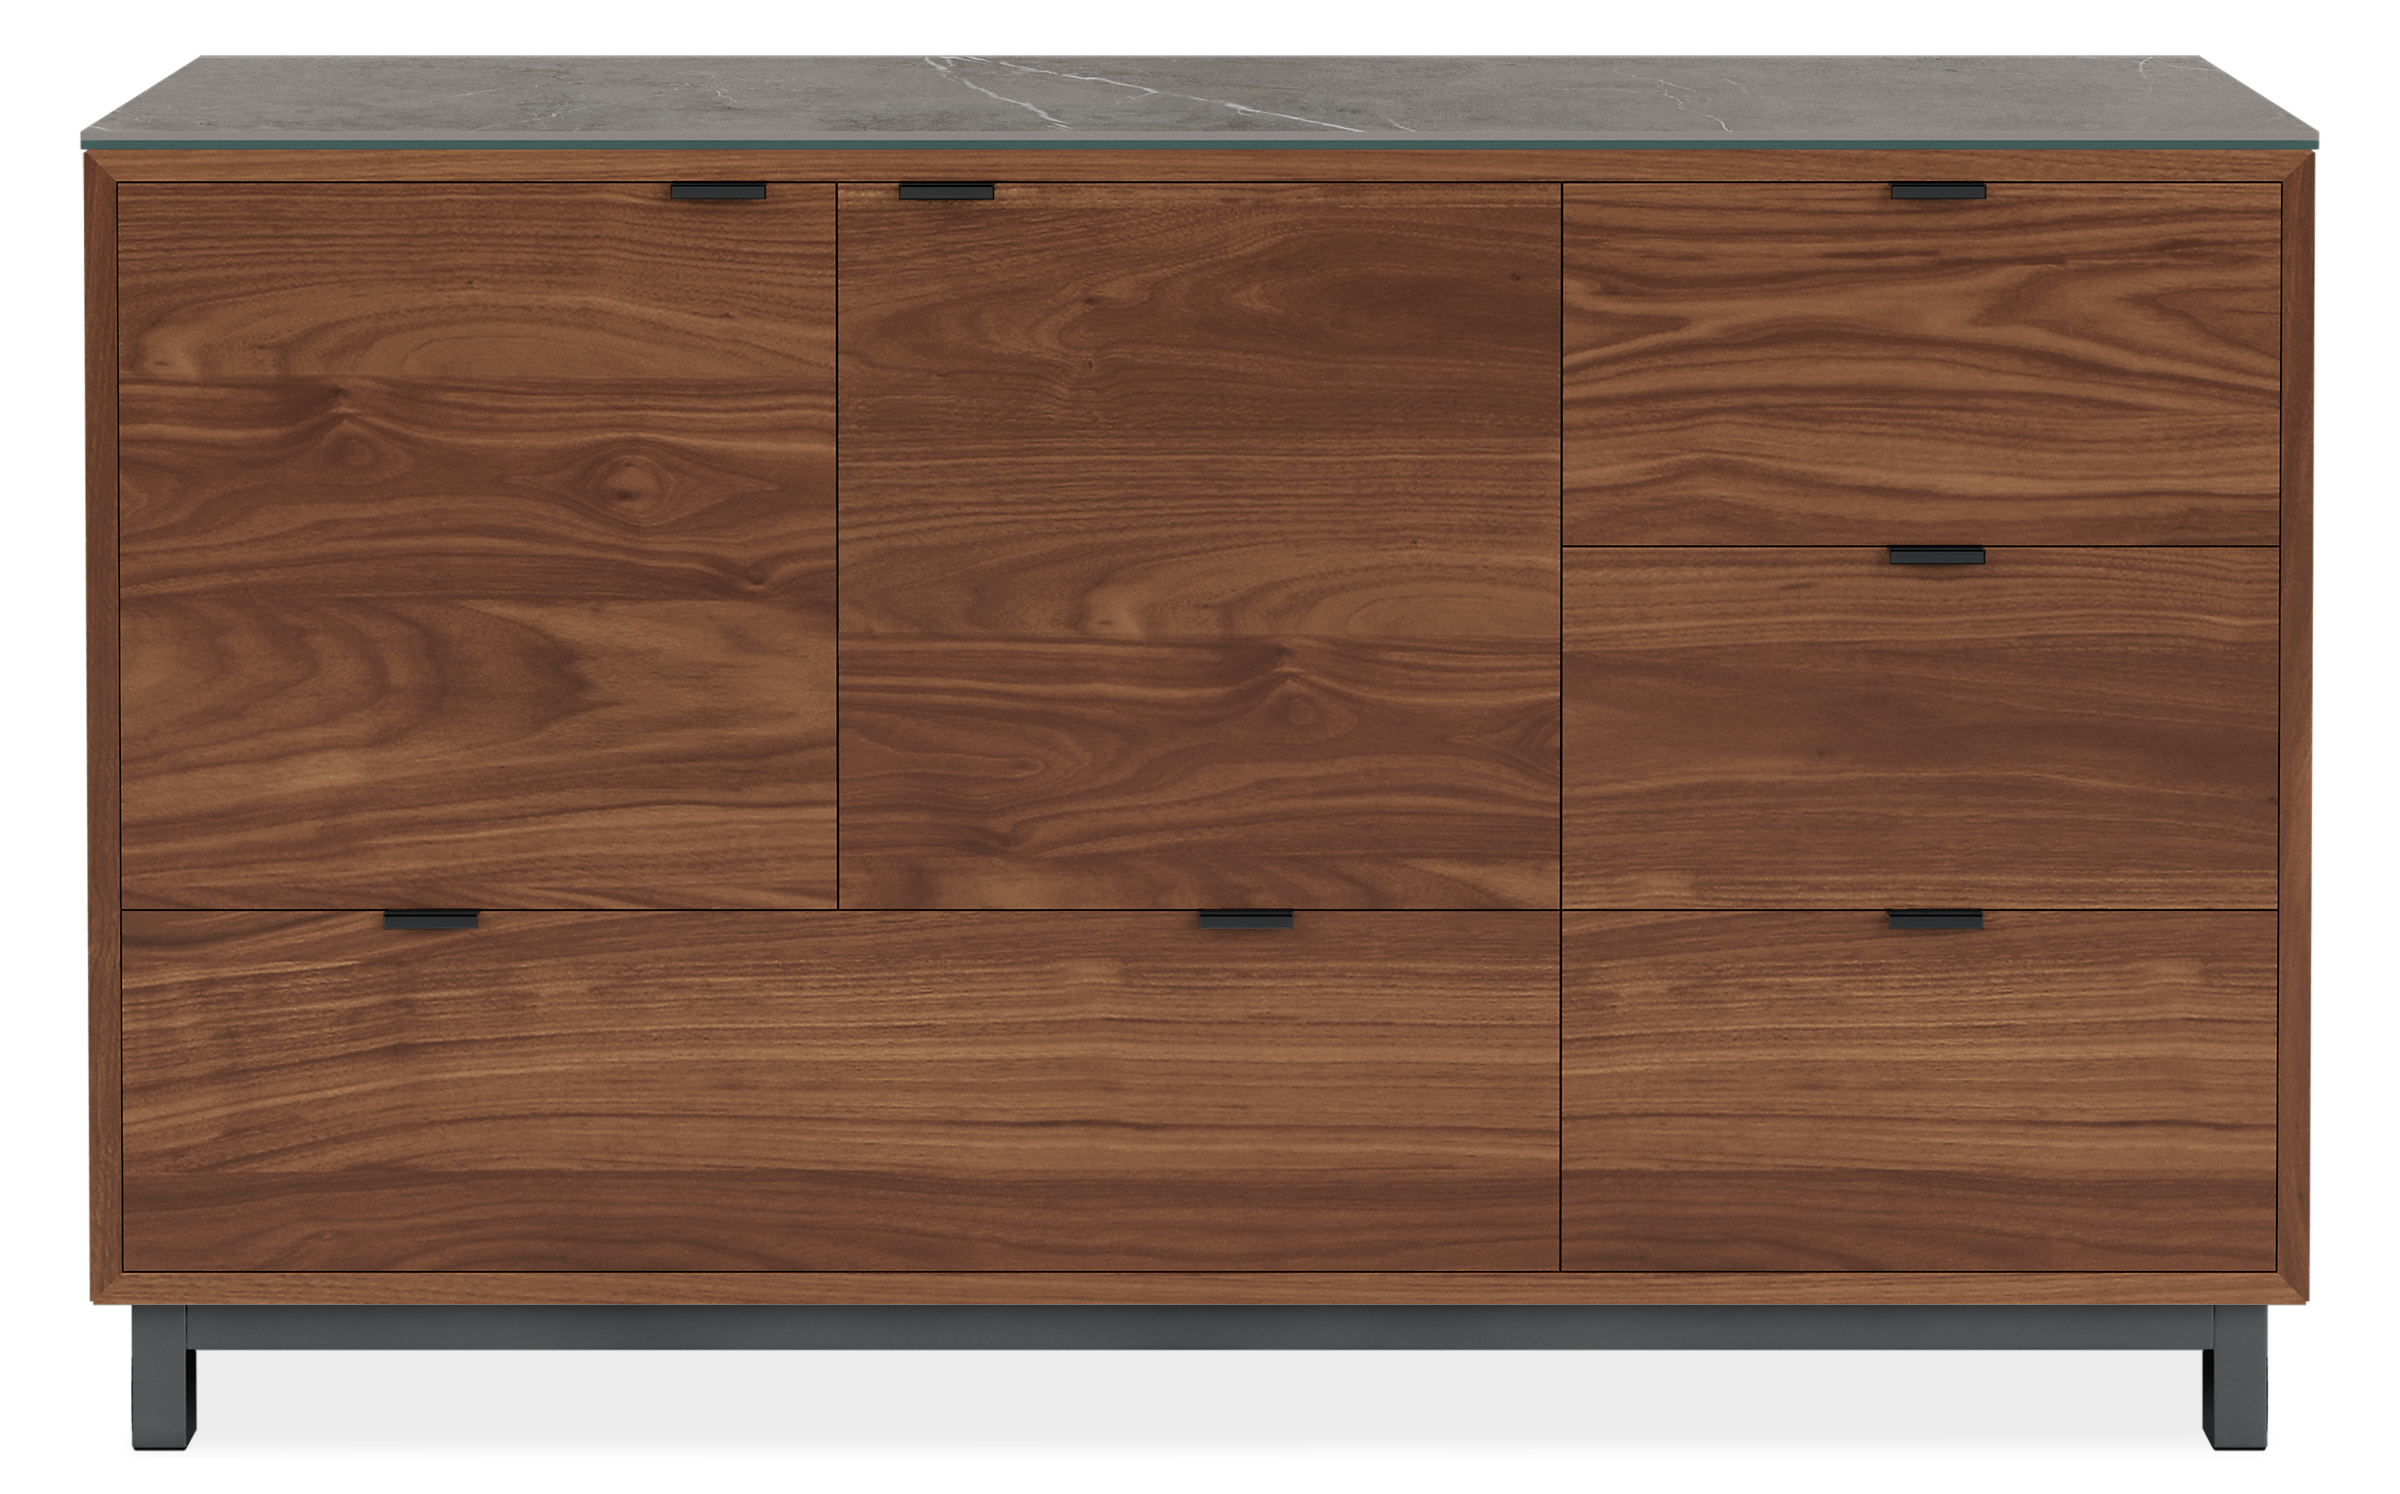 Copenhagen 60w 19.5d 36h Dining Cabinet with Top